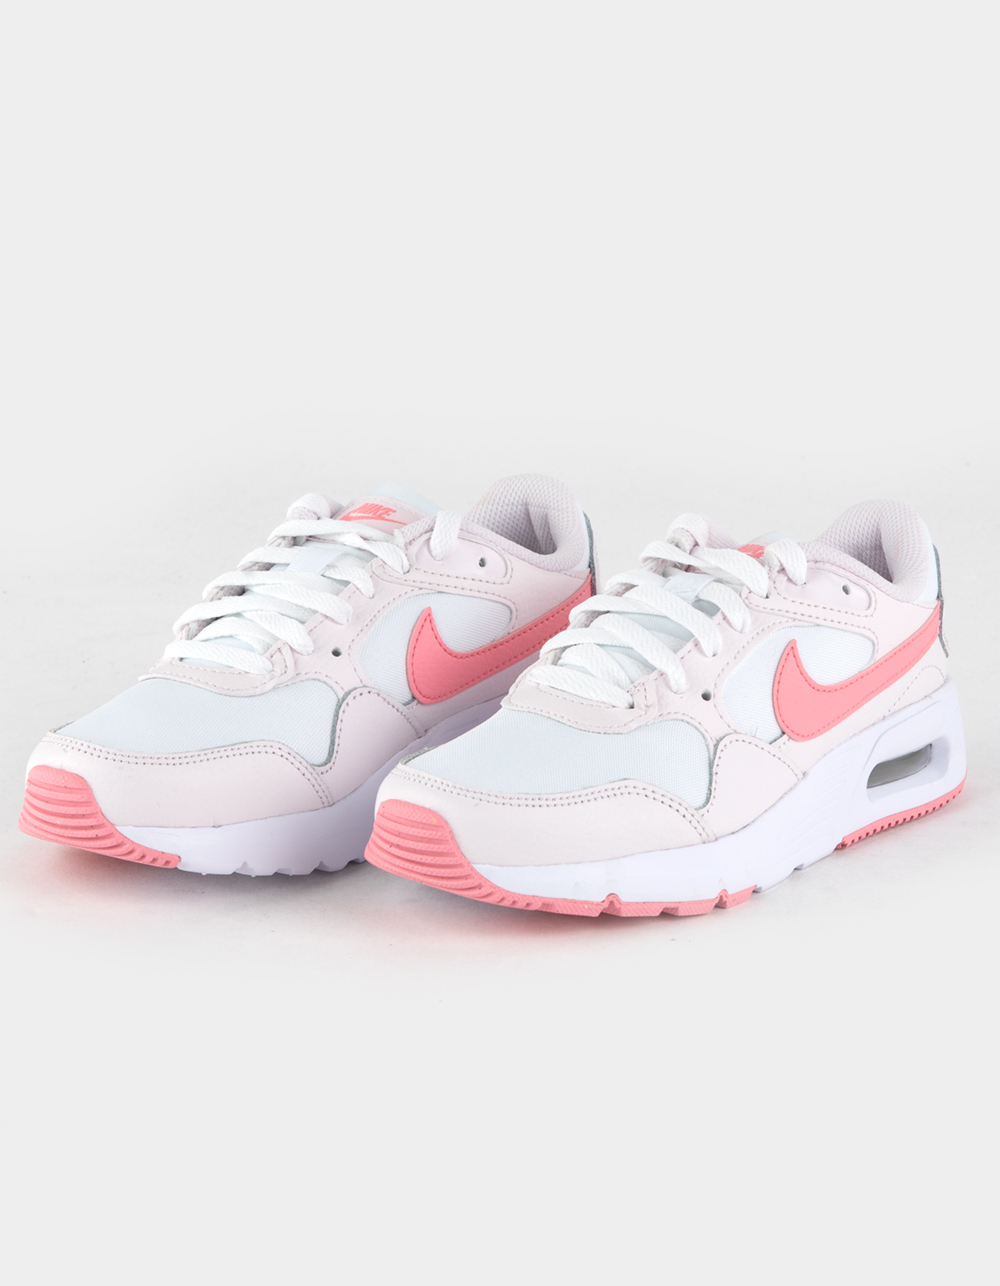 Air Max products